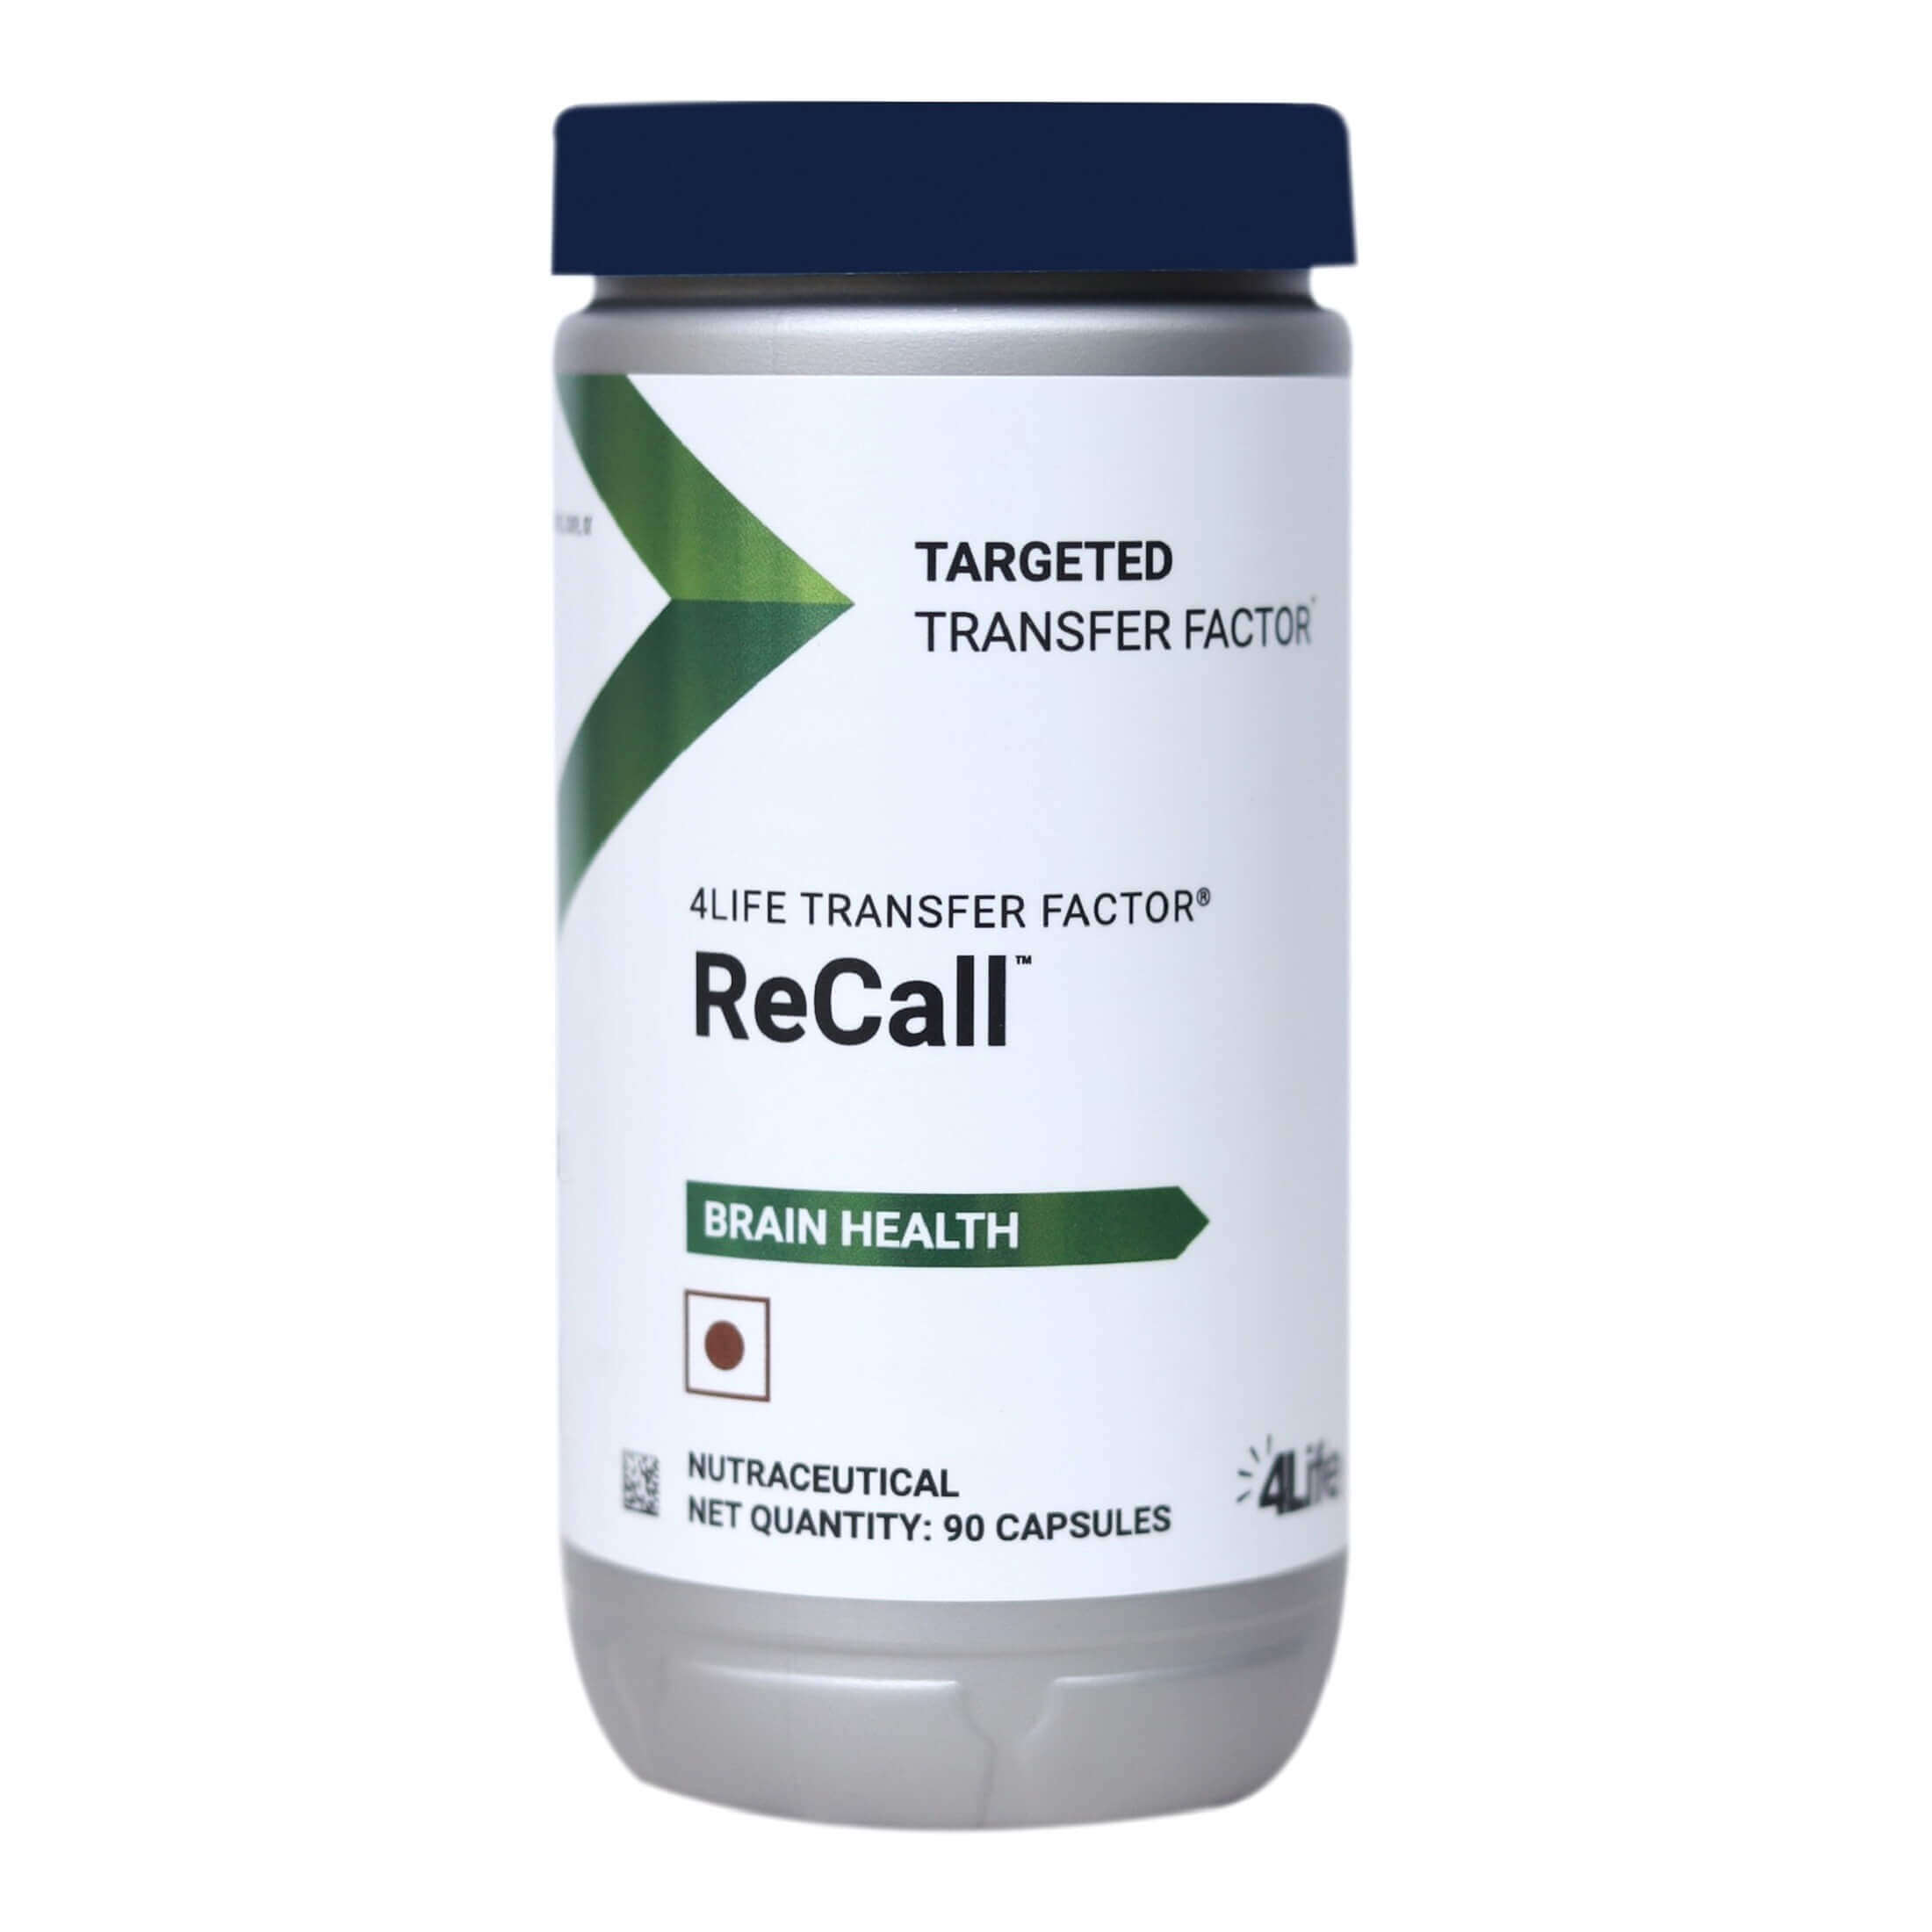 4Life Transfer Factor ReCall Capsules : Provides Phenomenal Support to Brain Function and Health, Supports Learning & Memory Functions, Improves Immunity (90 Capsules)